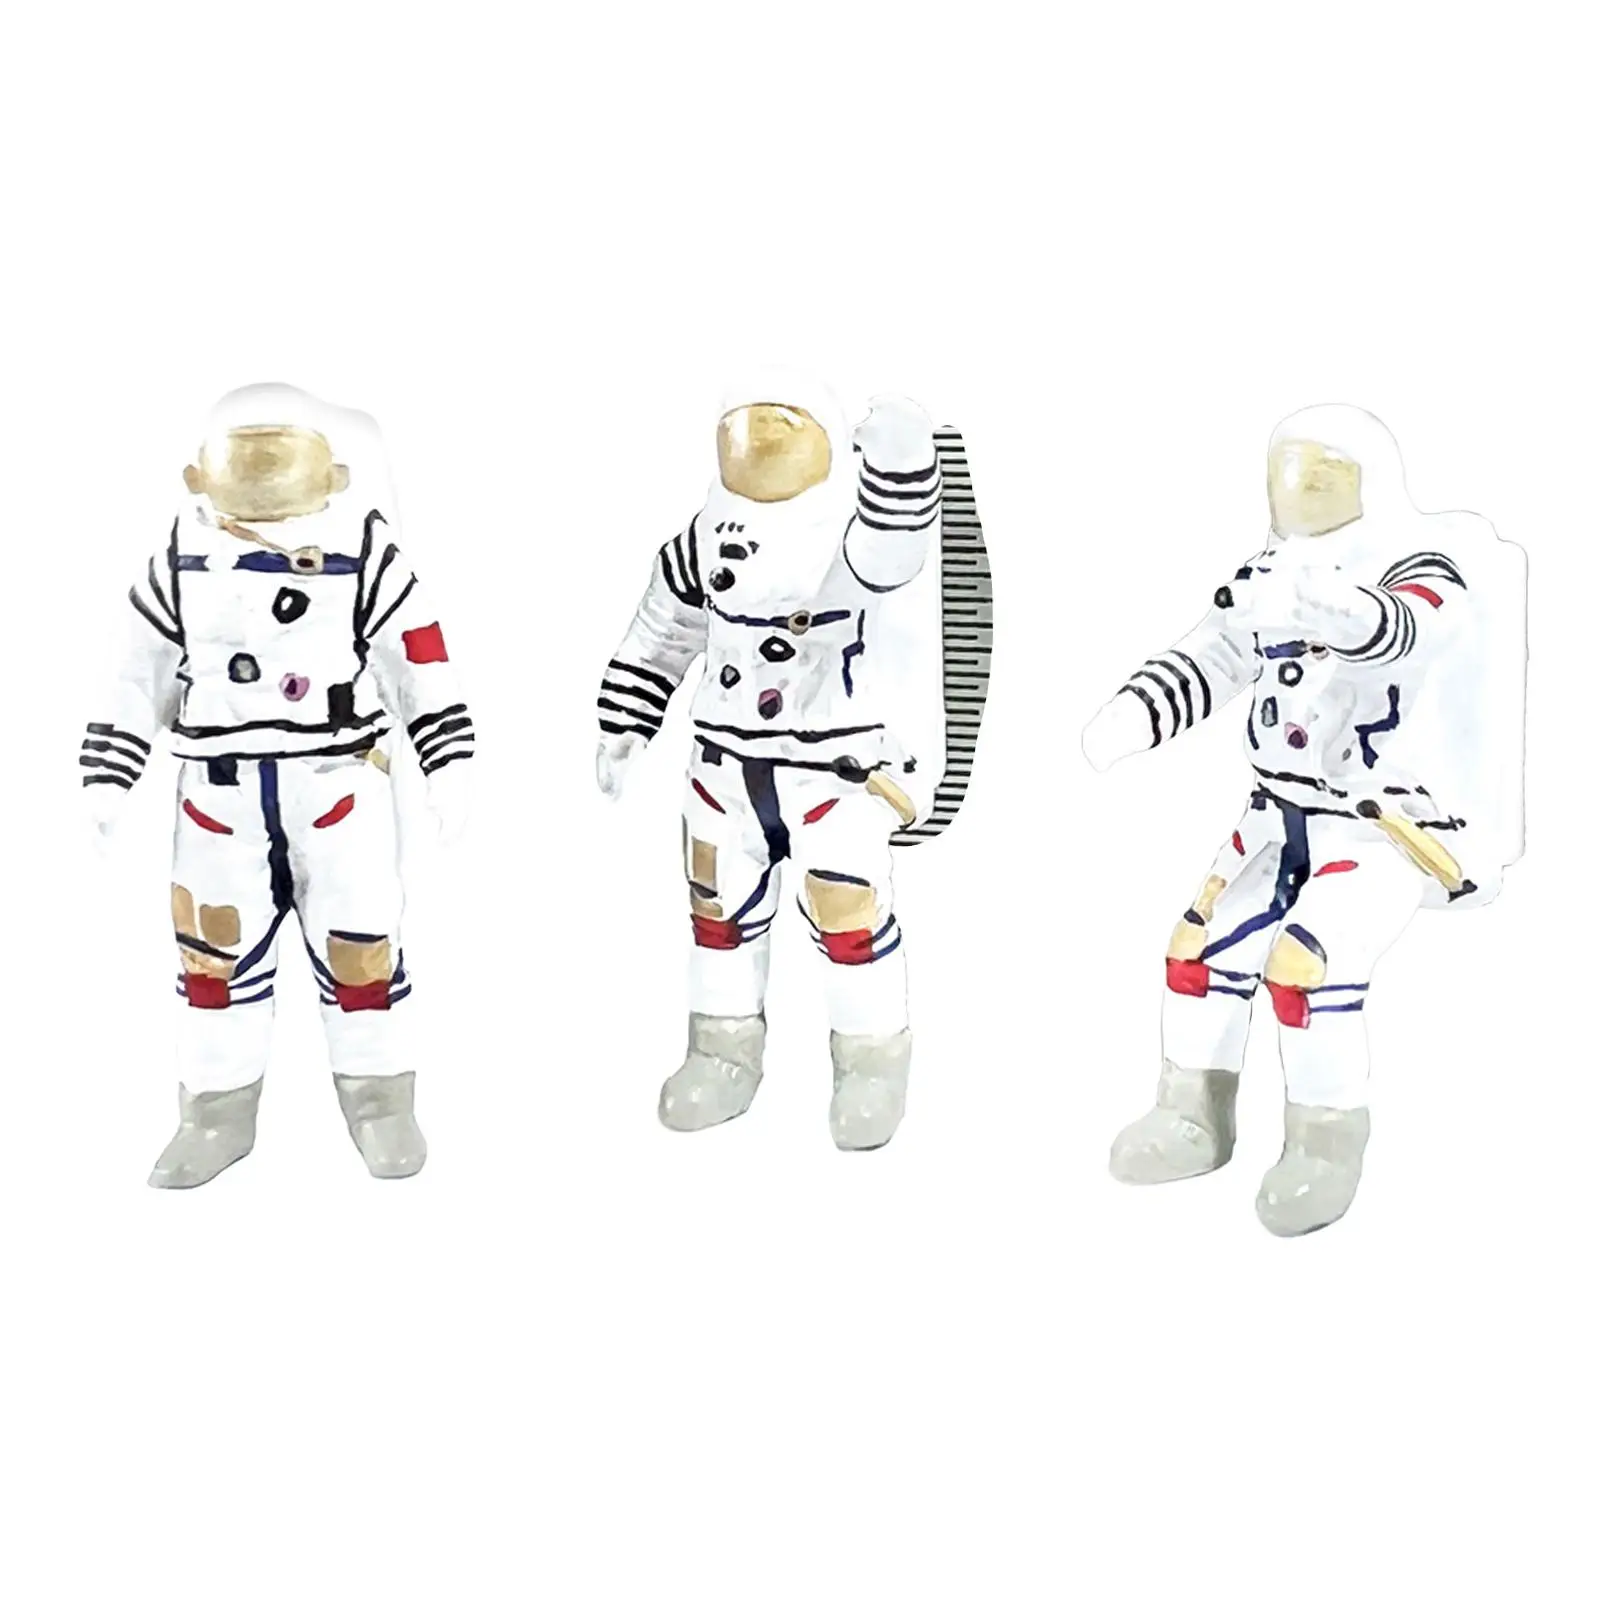 3x 1/64 Scale Astronaut Figurines Miniature Astronaut Action Figure Hand Painted Collectibles Spaceman Model for Party Favor